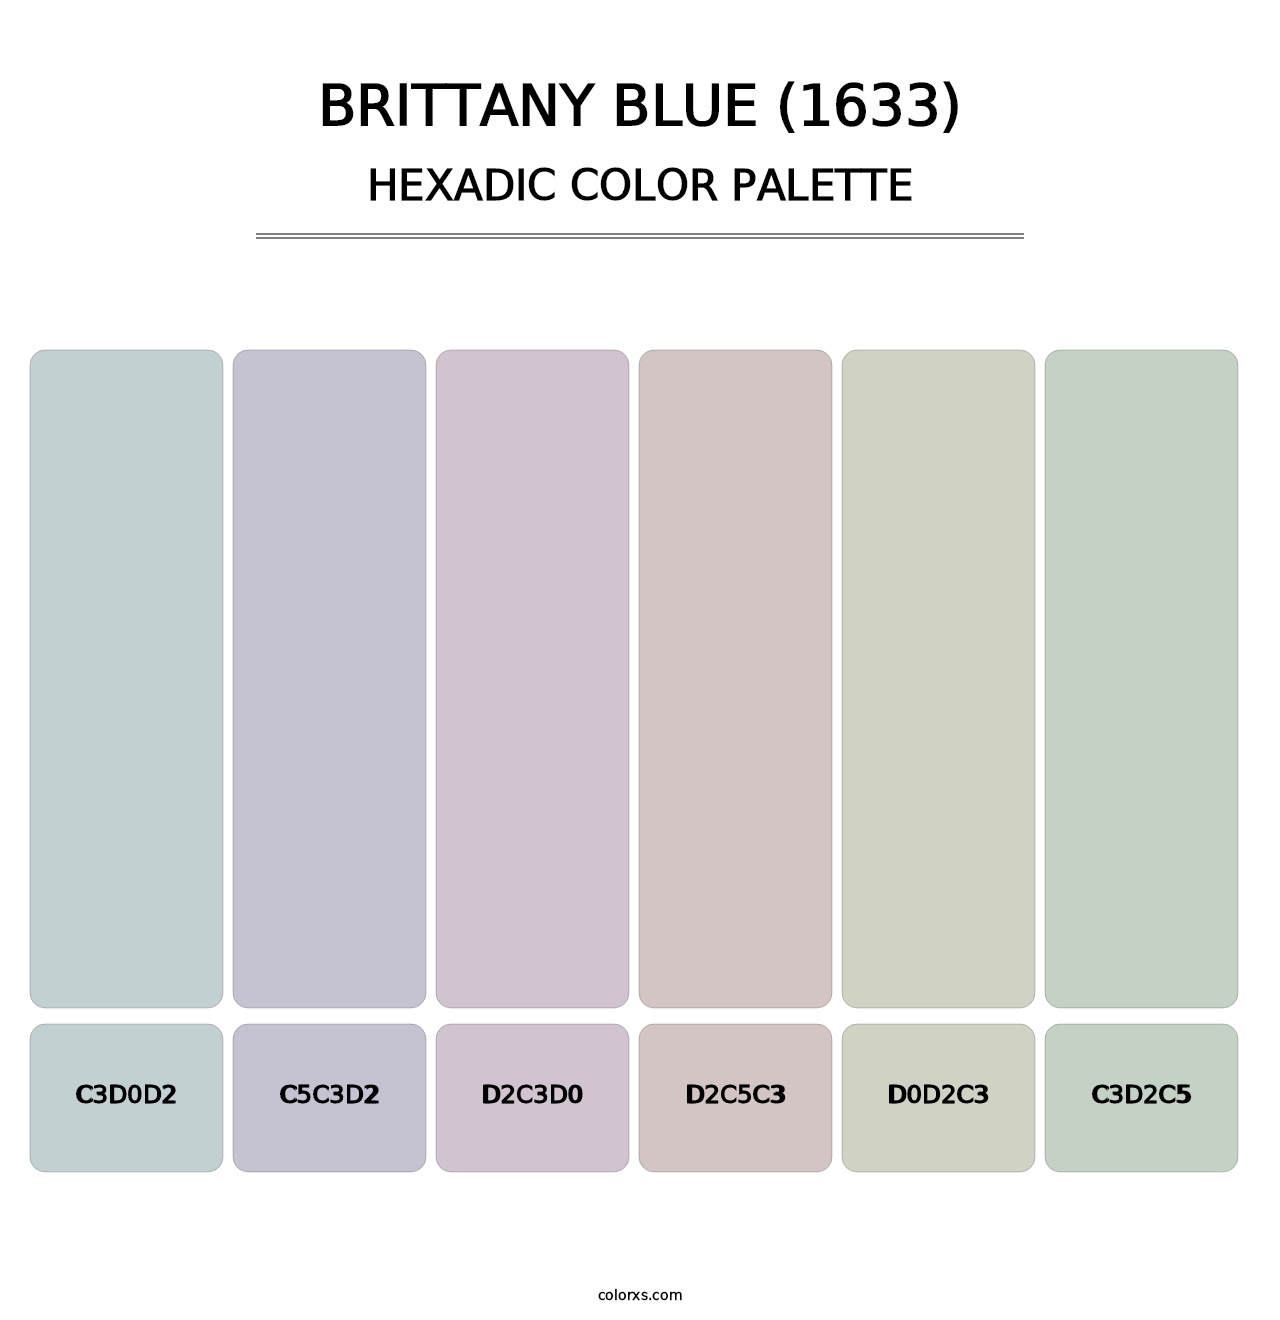 Brittany Blue (1633) - Hexadic Color Palette